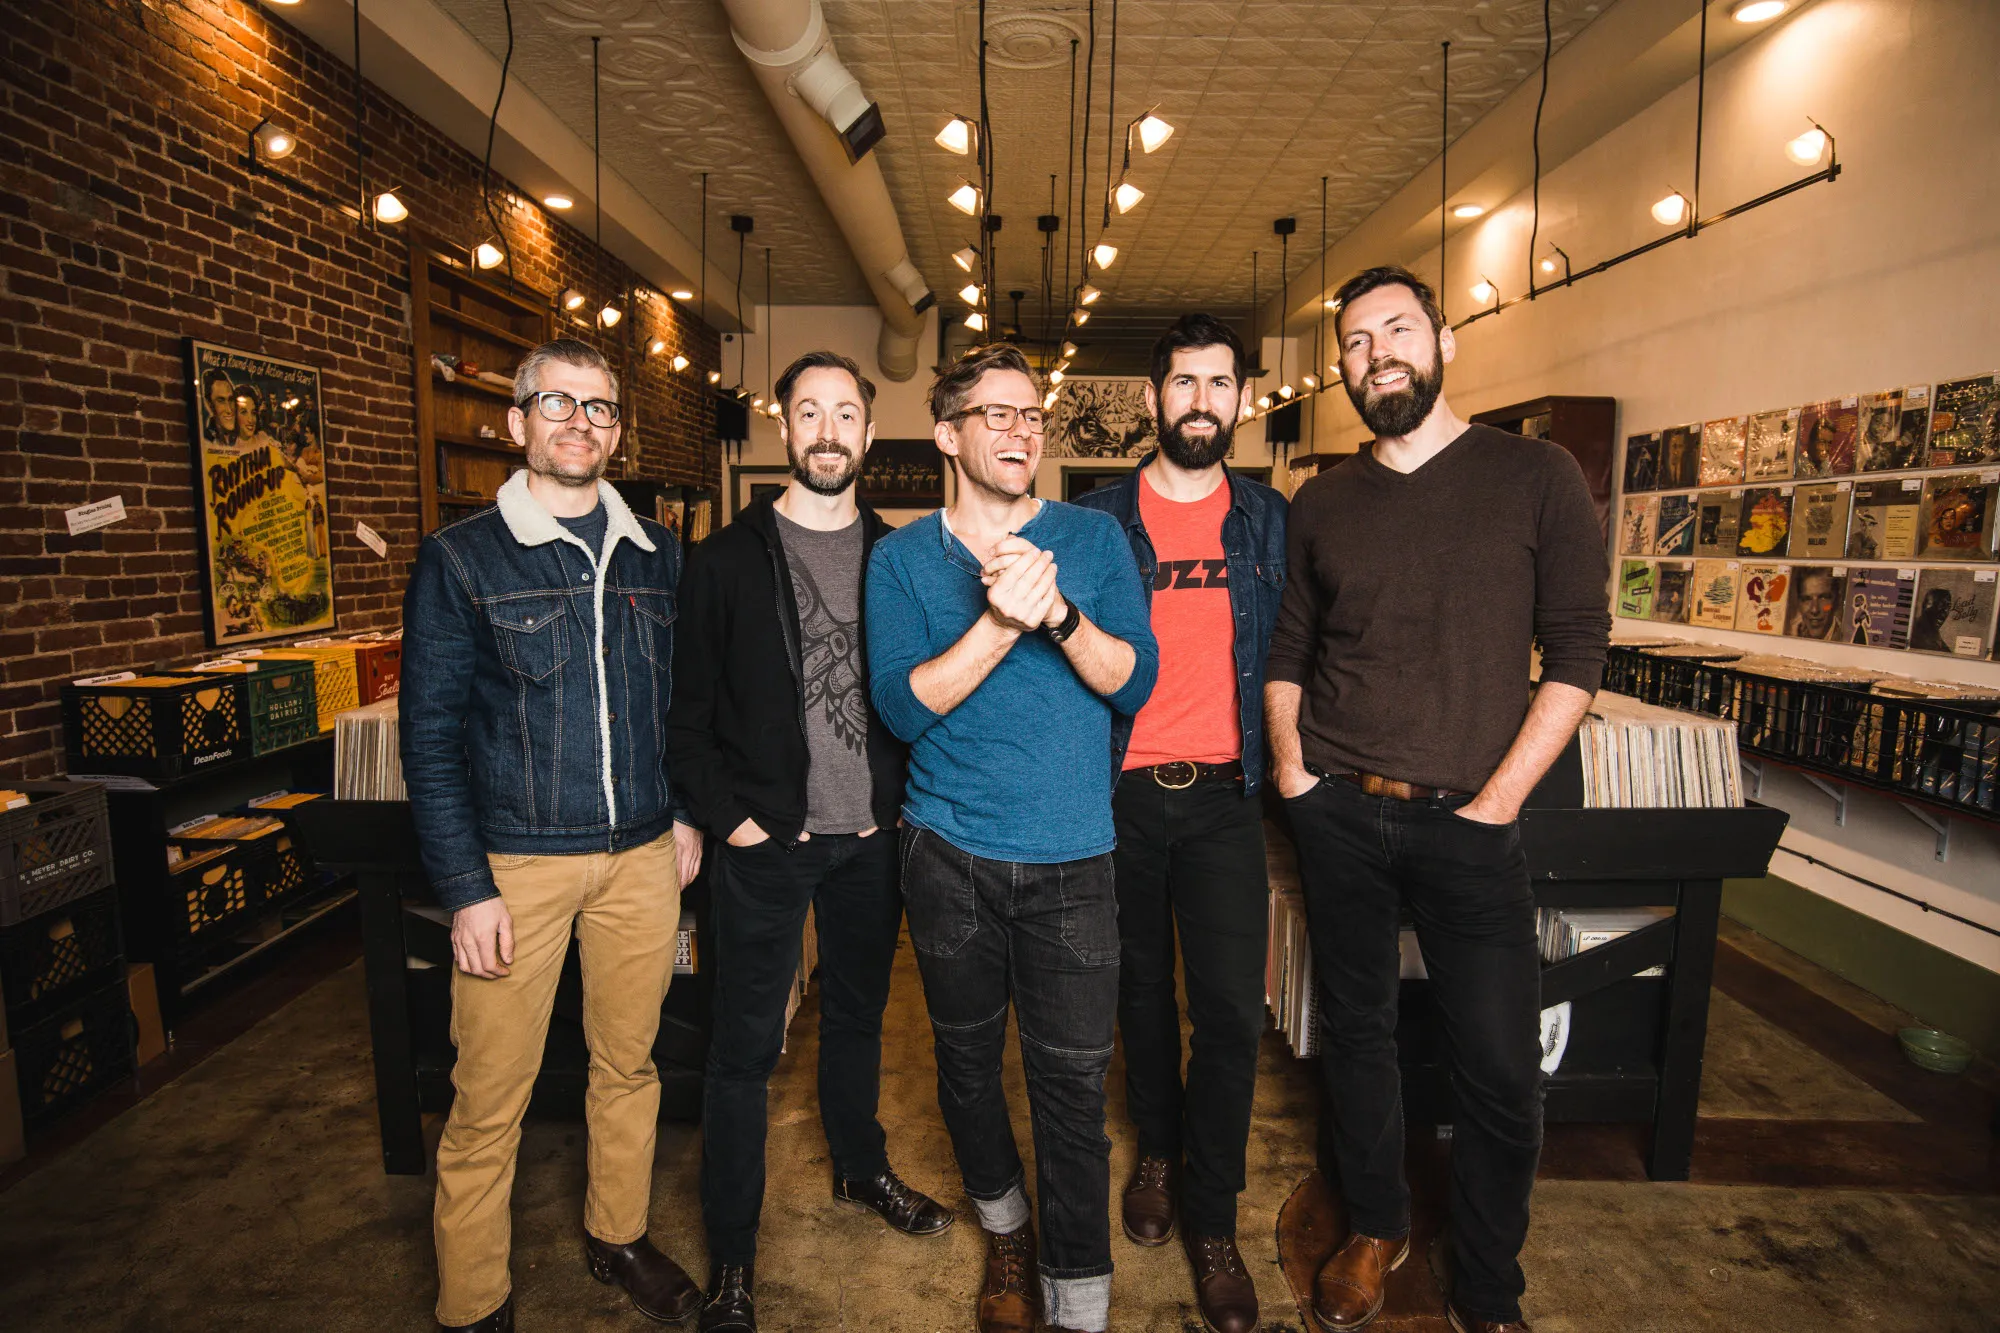 The Steel Wheels Share Inspirational True Story Behind New Track, “My Name Is Sharon”